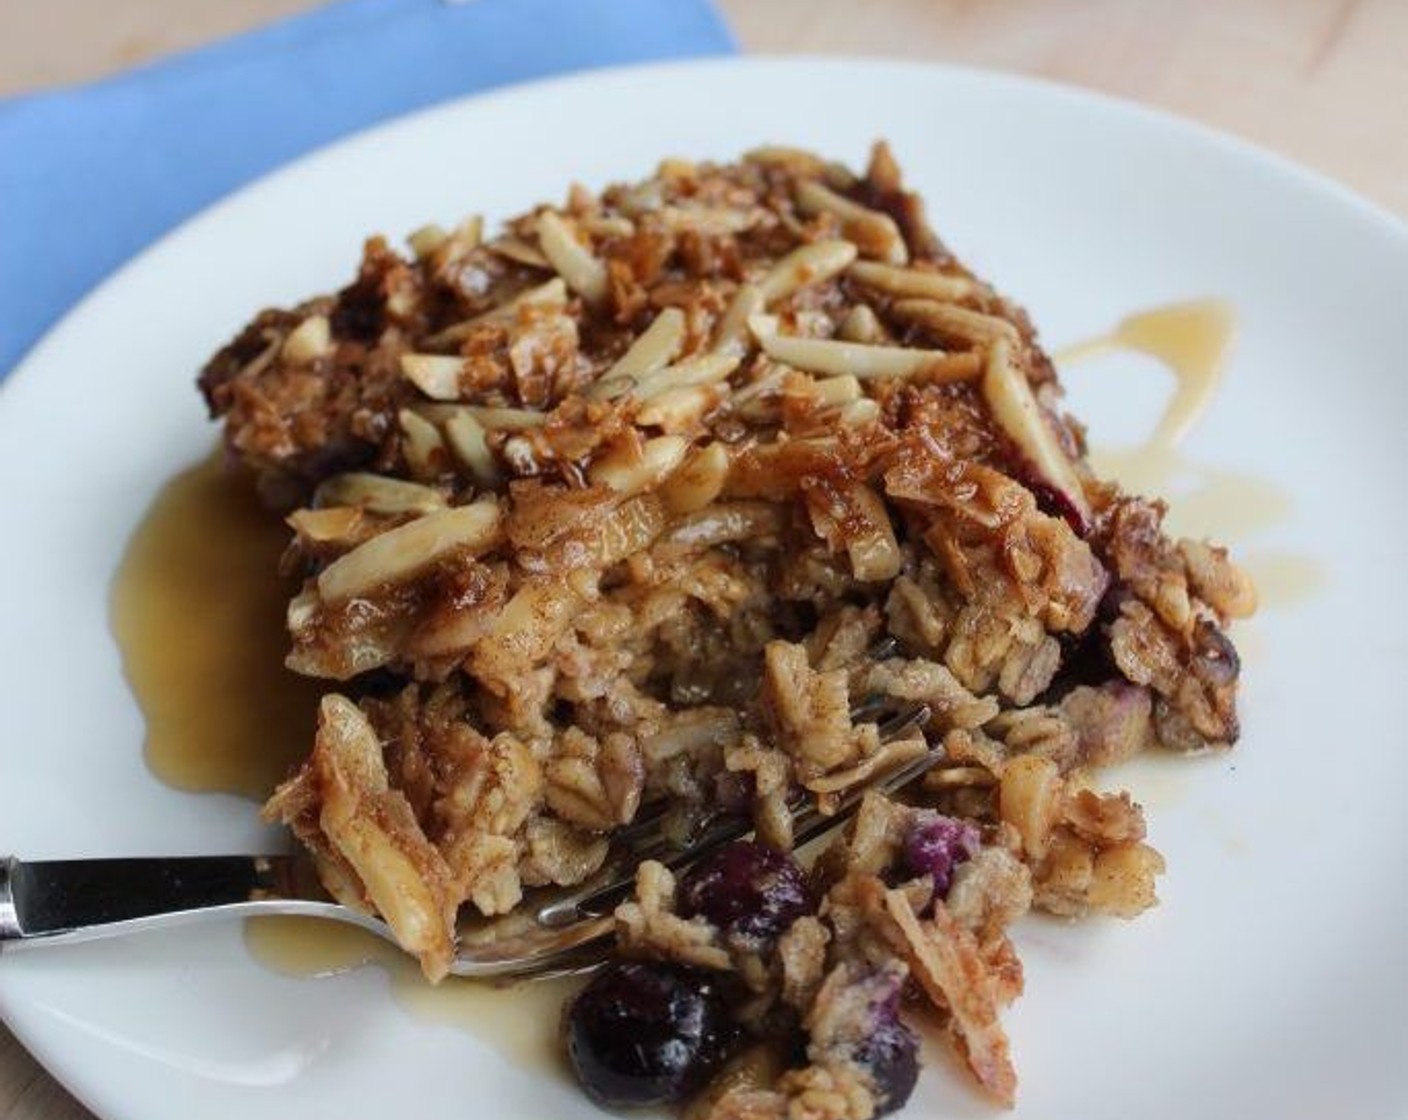 Blueberry Coconut Baked Oatmeal